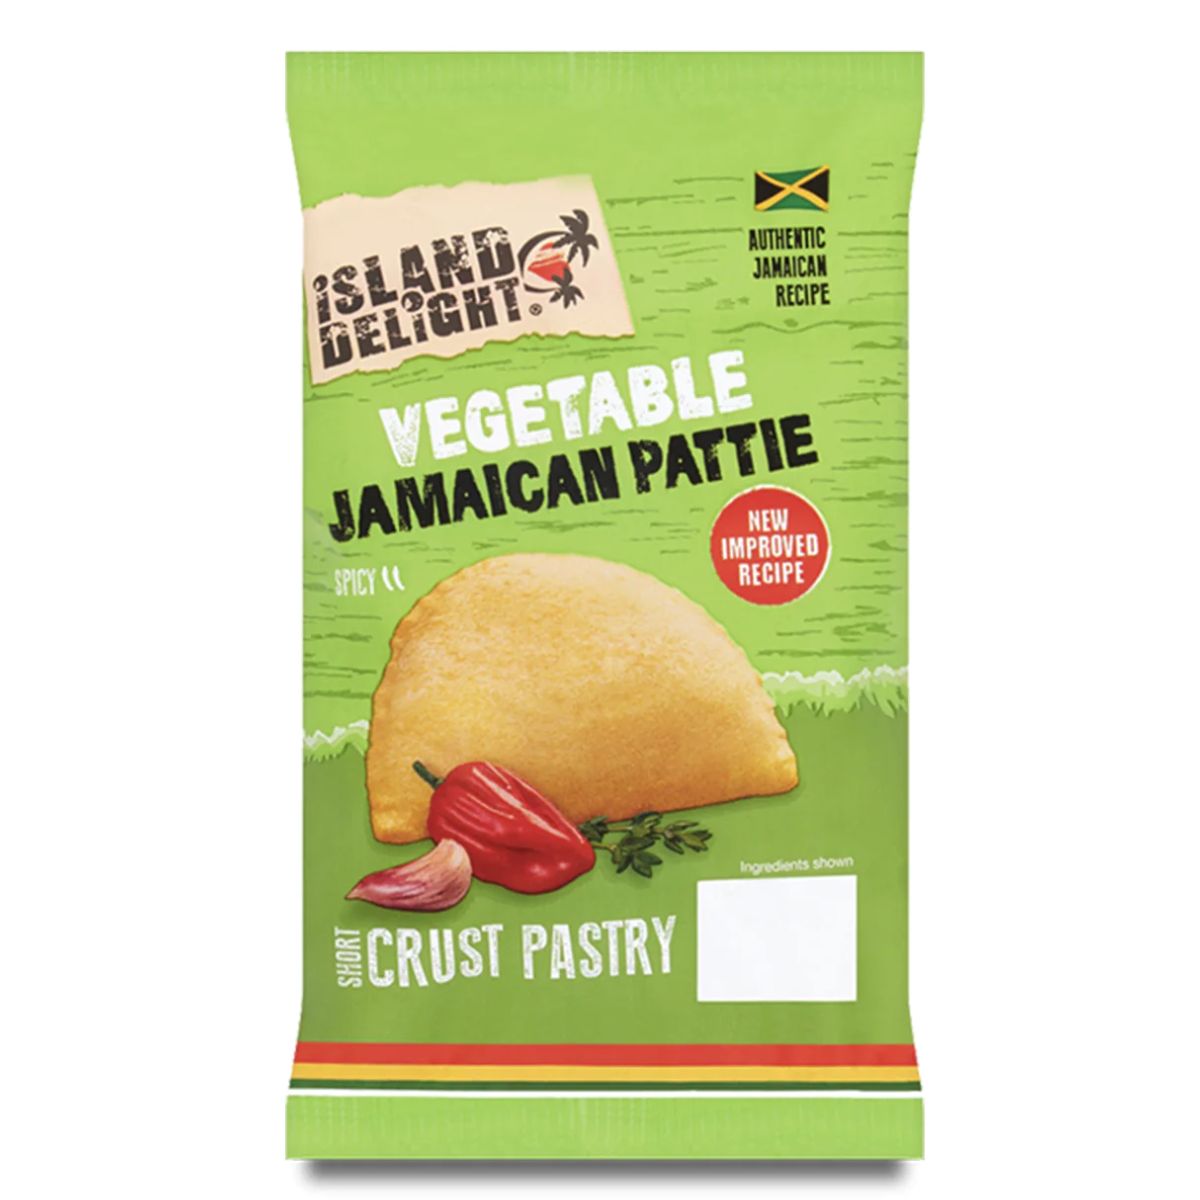 Packaging for a Island Delight- Jamaican Vegetable Short Crust Pattie with a new improved recipe.